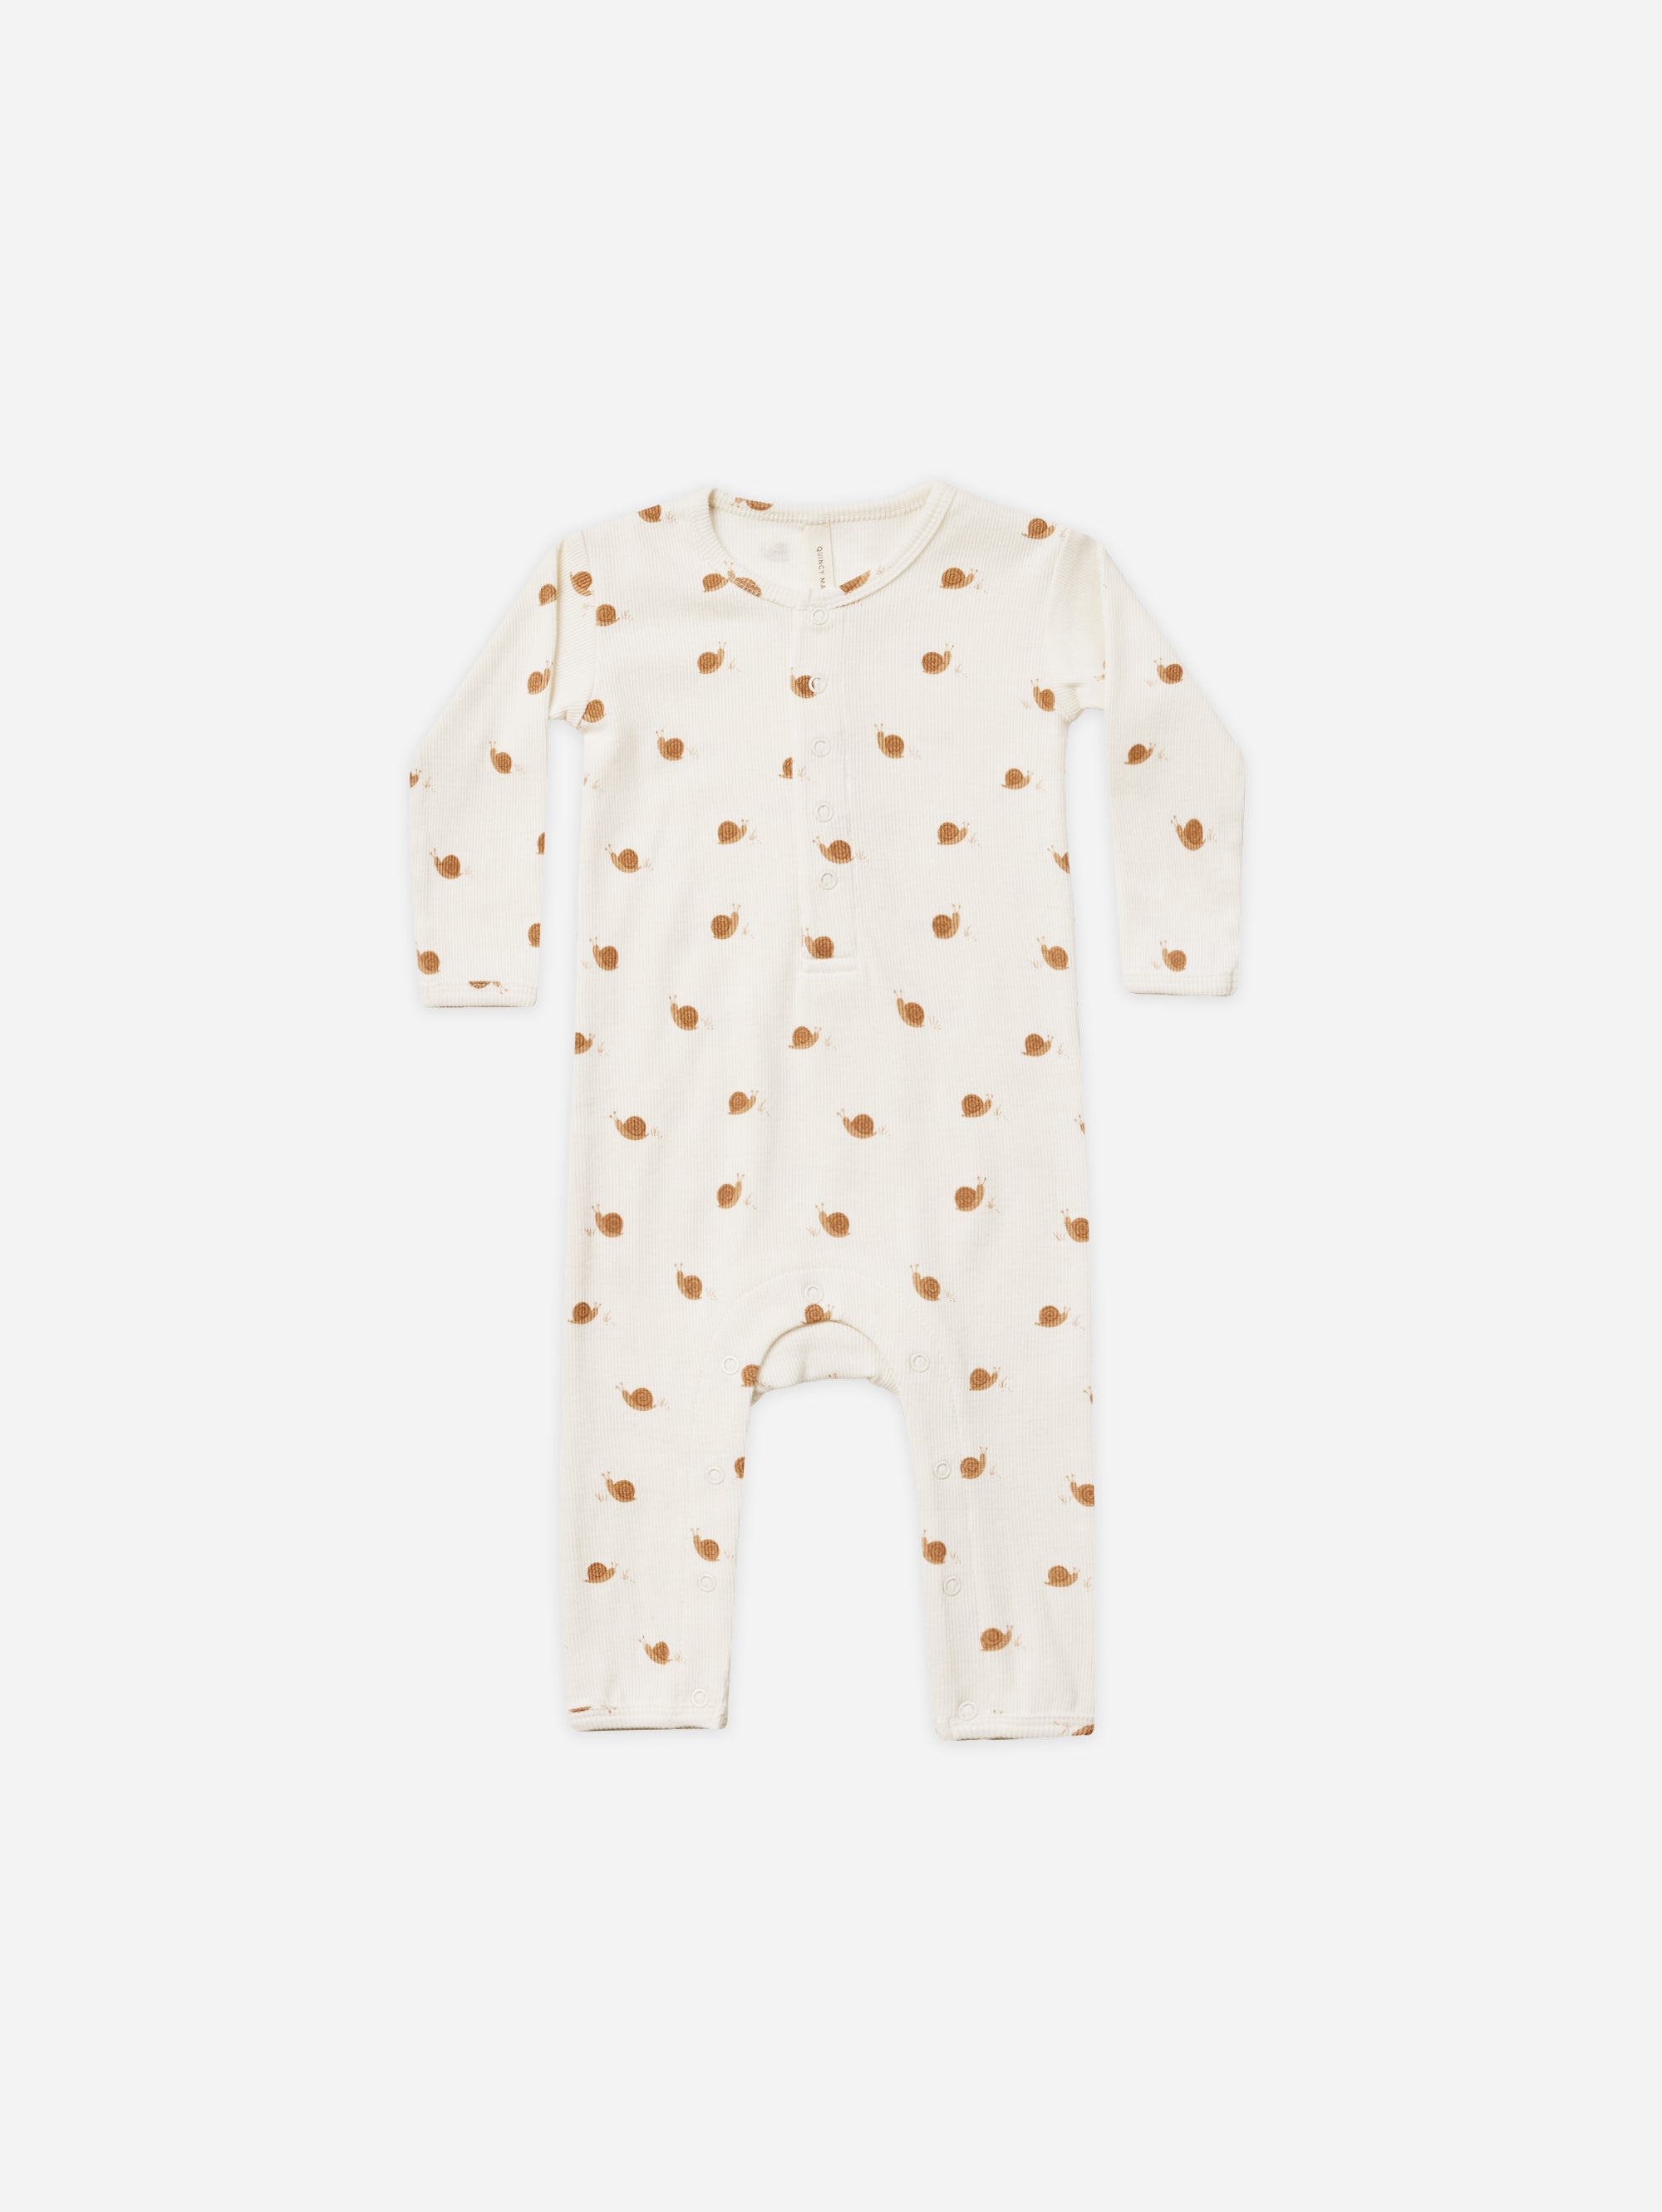 Ribbed Baby Jumpsuit || Snails - Rylee + Cru | Kids Clothes | Trendy Baby Clothes | Modern Infant Outfits |